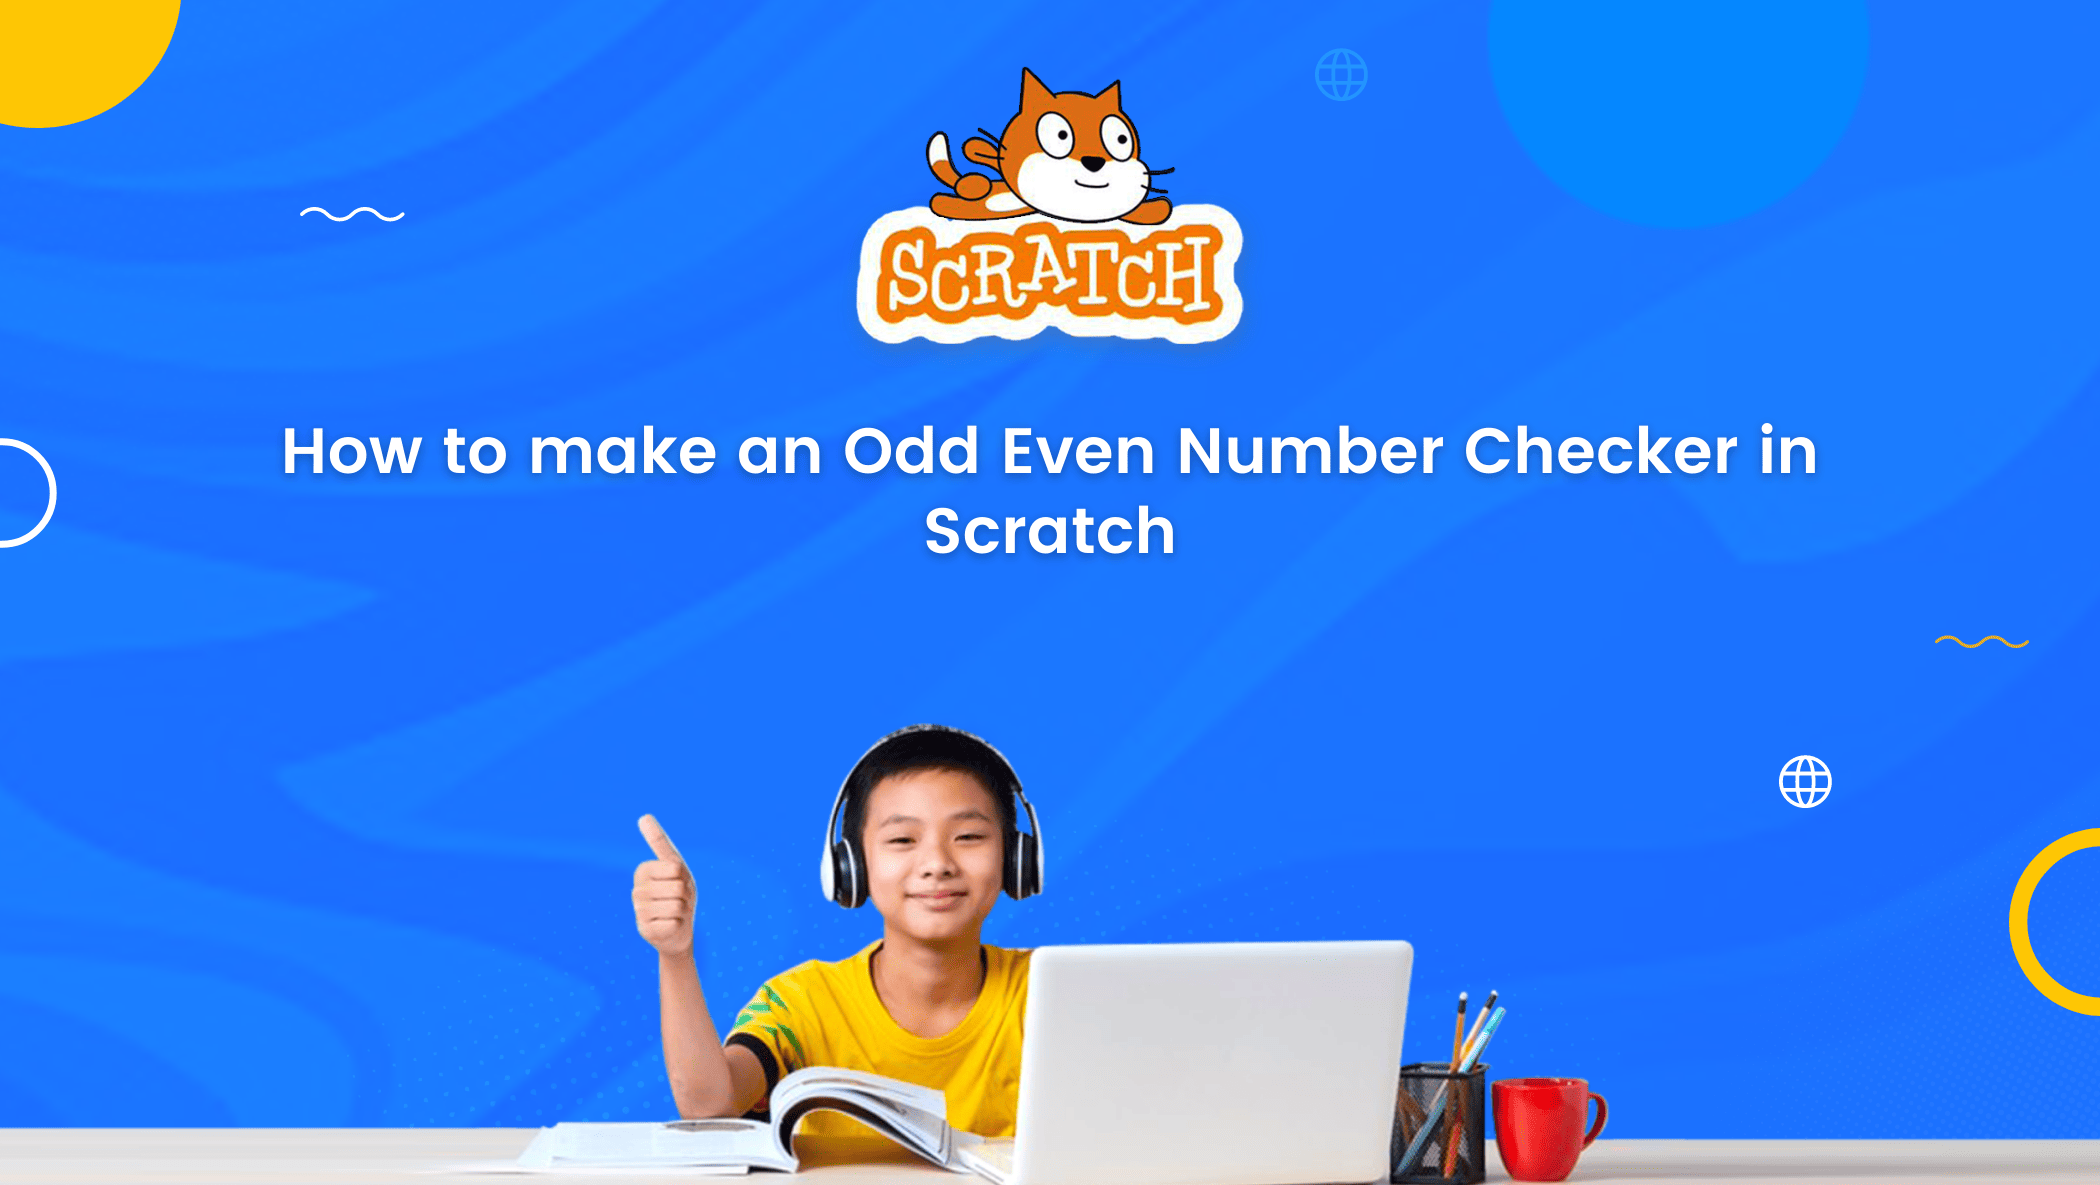 How to make an Odd Even Number Checker in Scratch